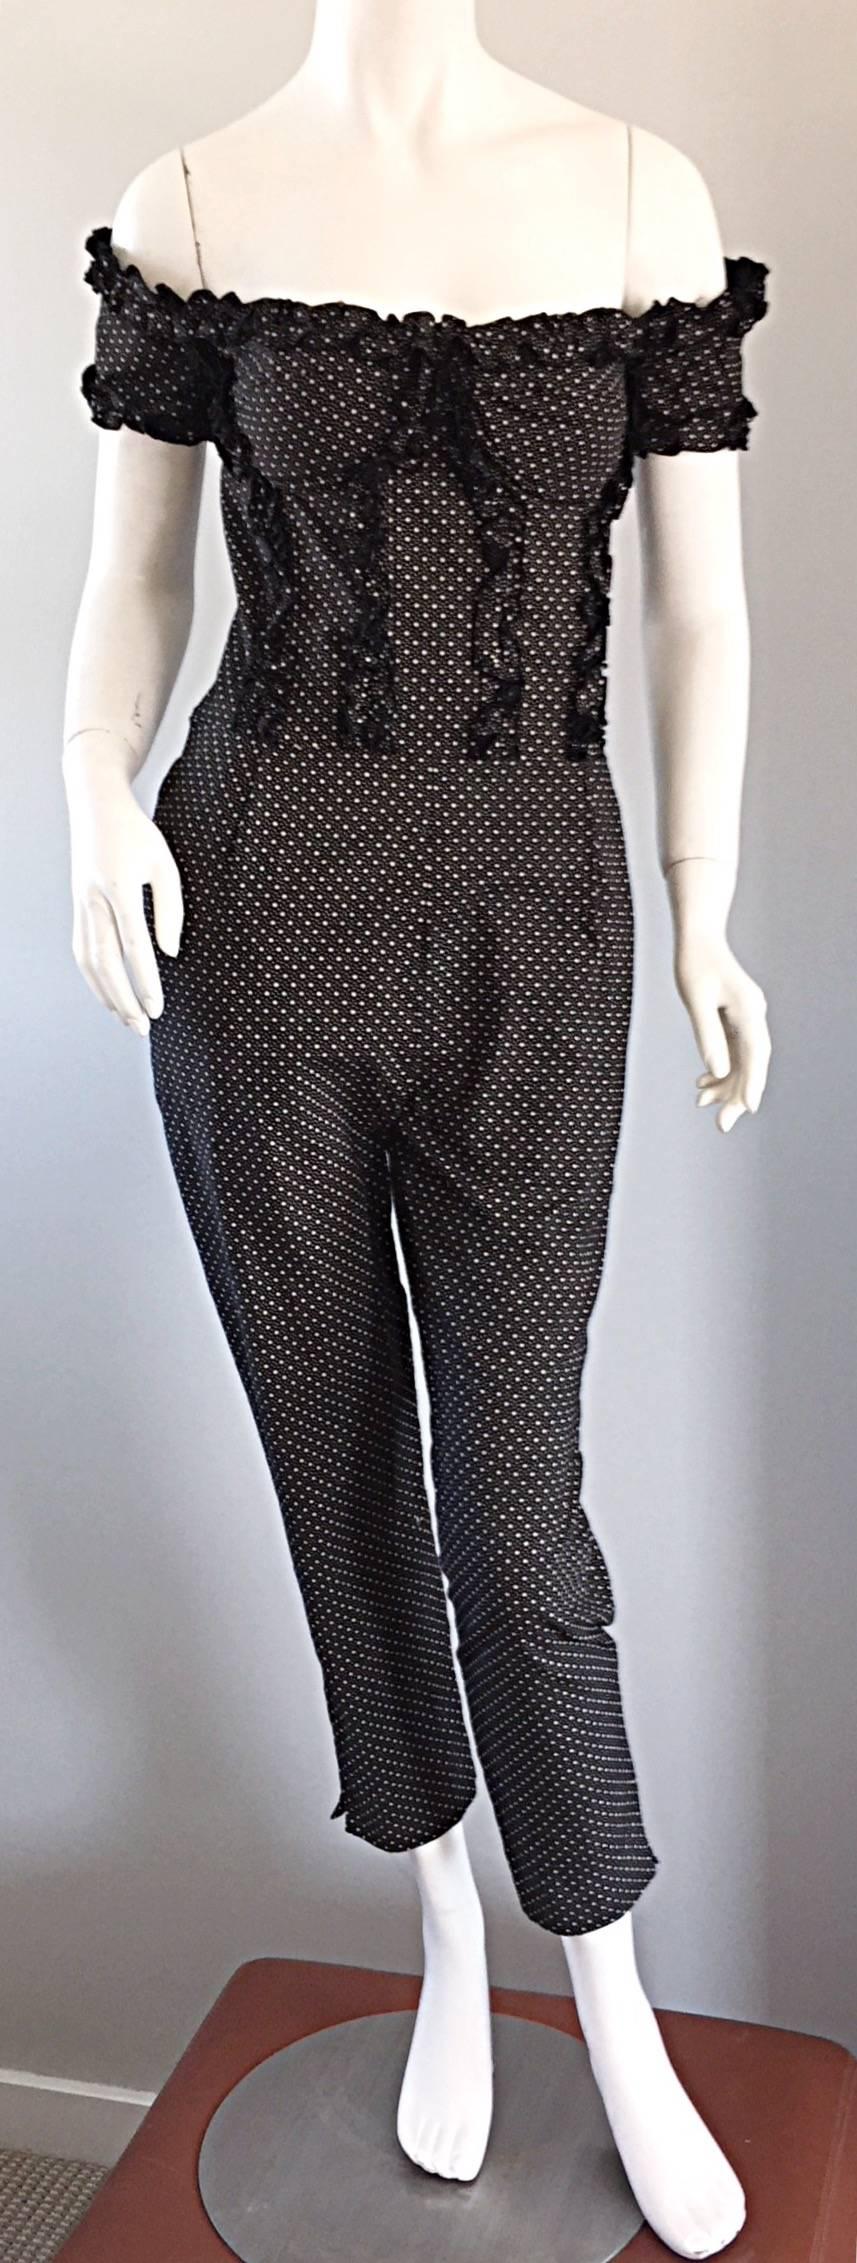 Wonderful vintage 80s Brioni jumpsuit! Amazing fit, with an insane amount of detail! Ruffles down the boned corset, and at sleeves. Sits slightly off the shoulder. Cropped trousers, with side vents on each leg opening. Can easily transition from day